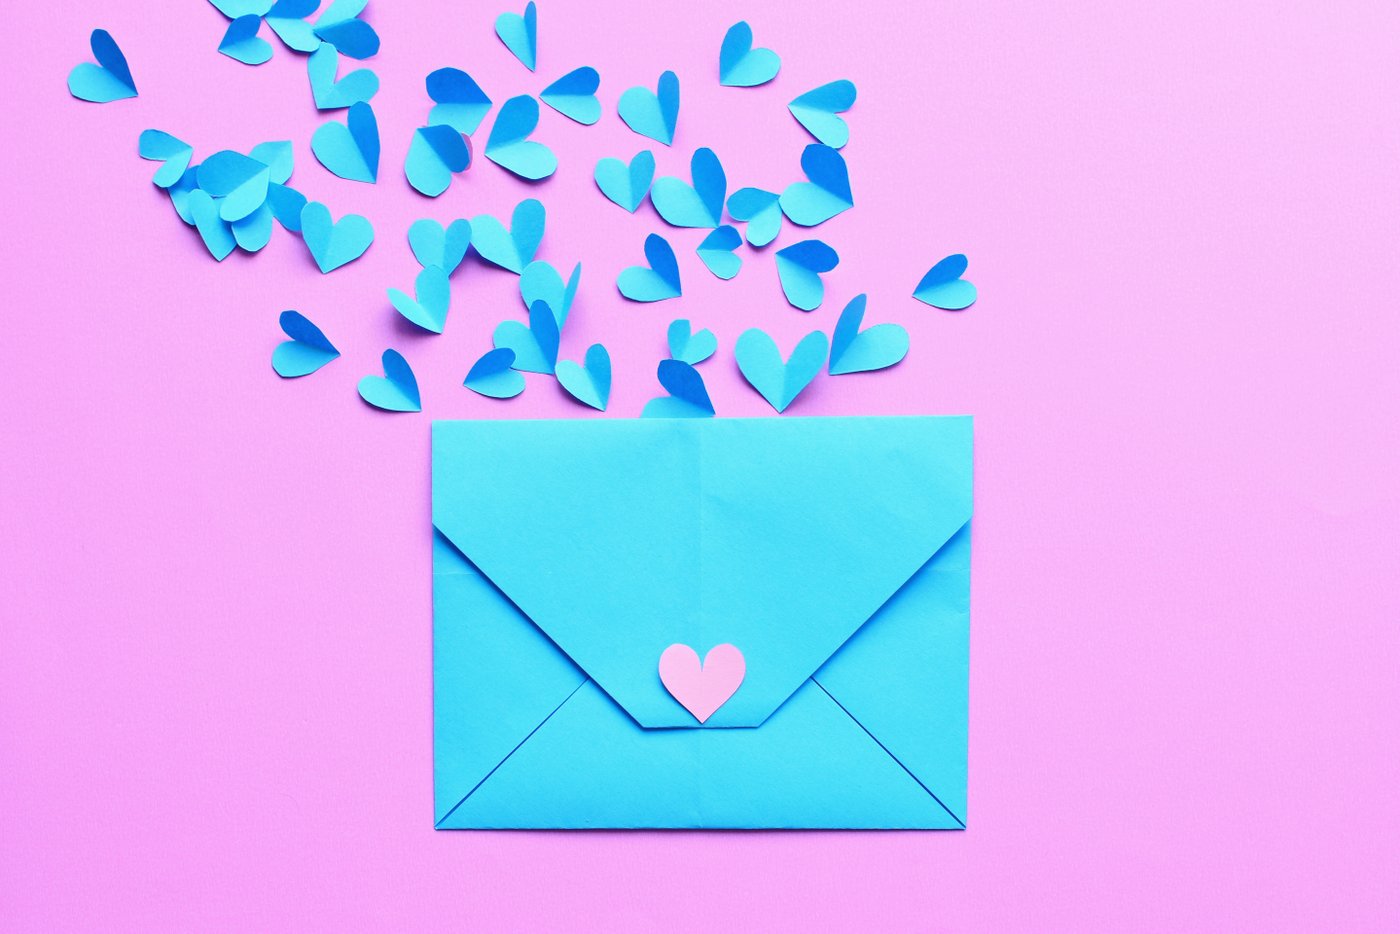 Contact us - letter with hearts